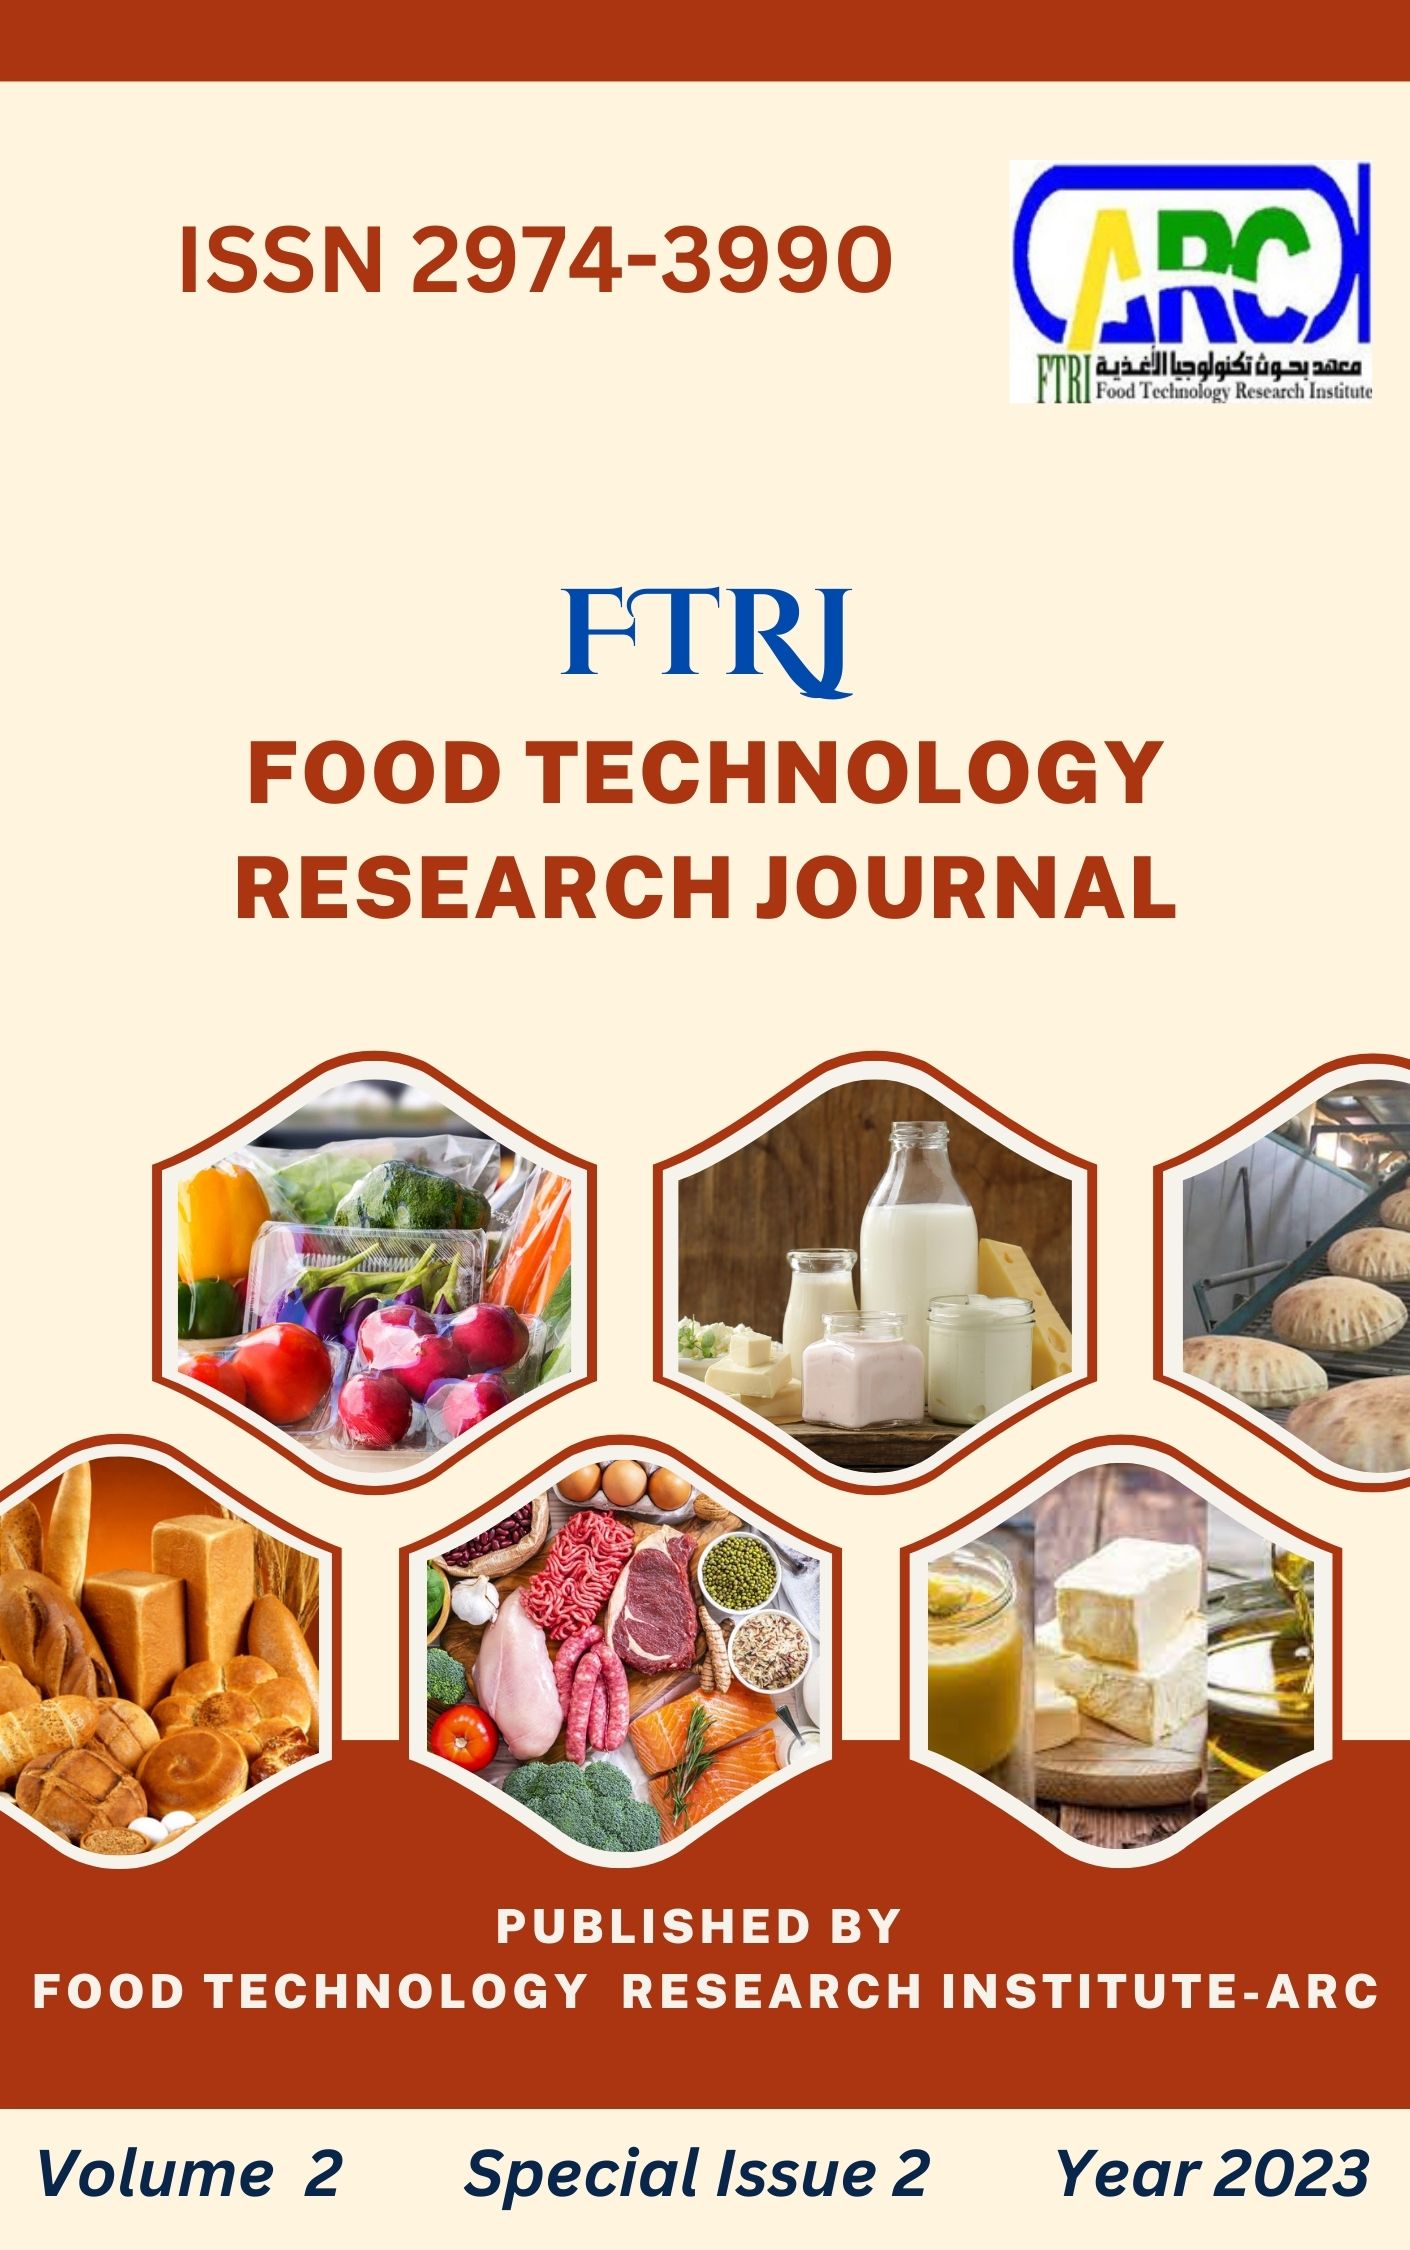 Food Technology Research Journal